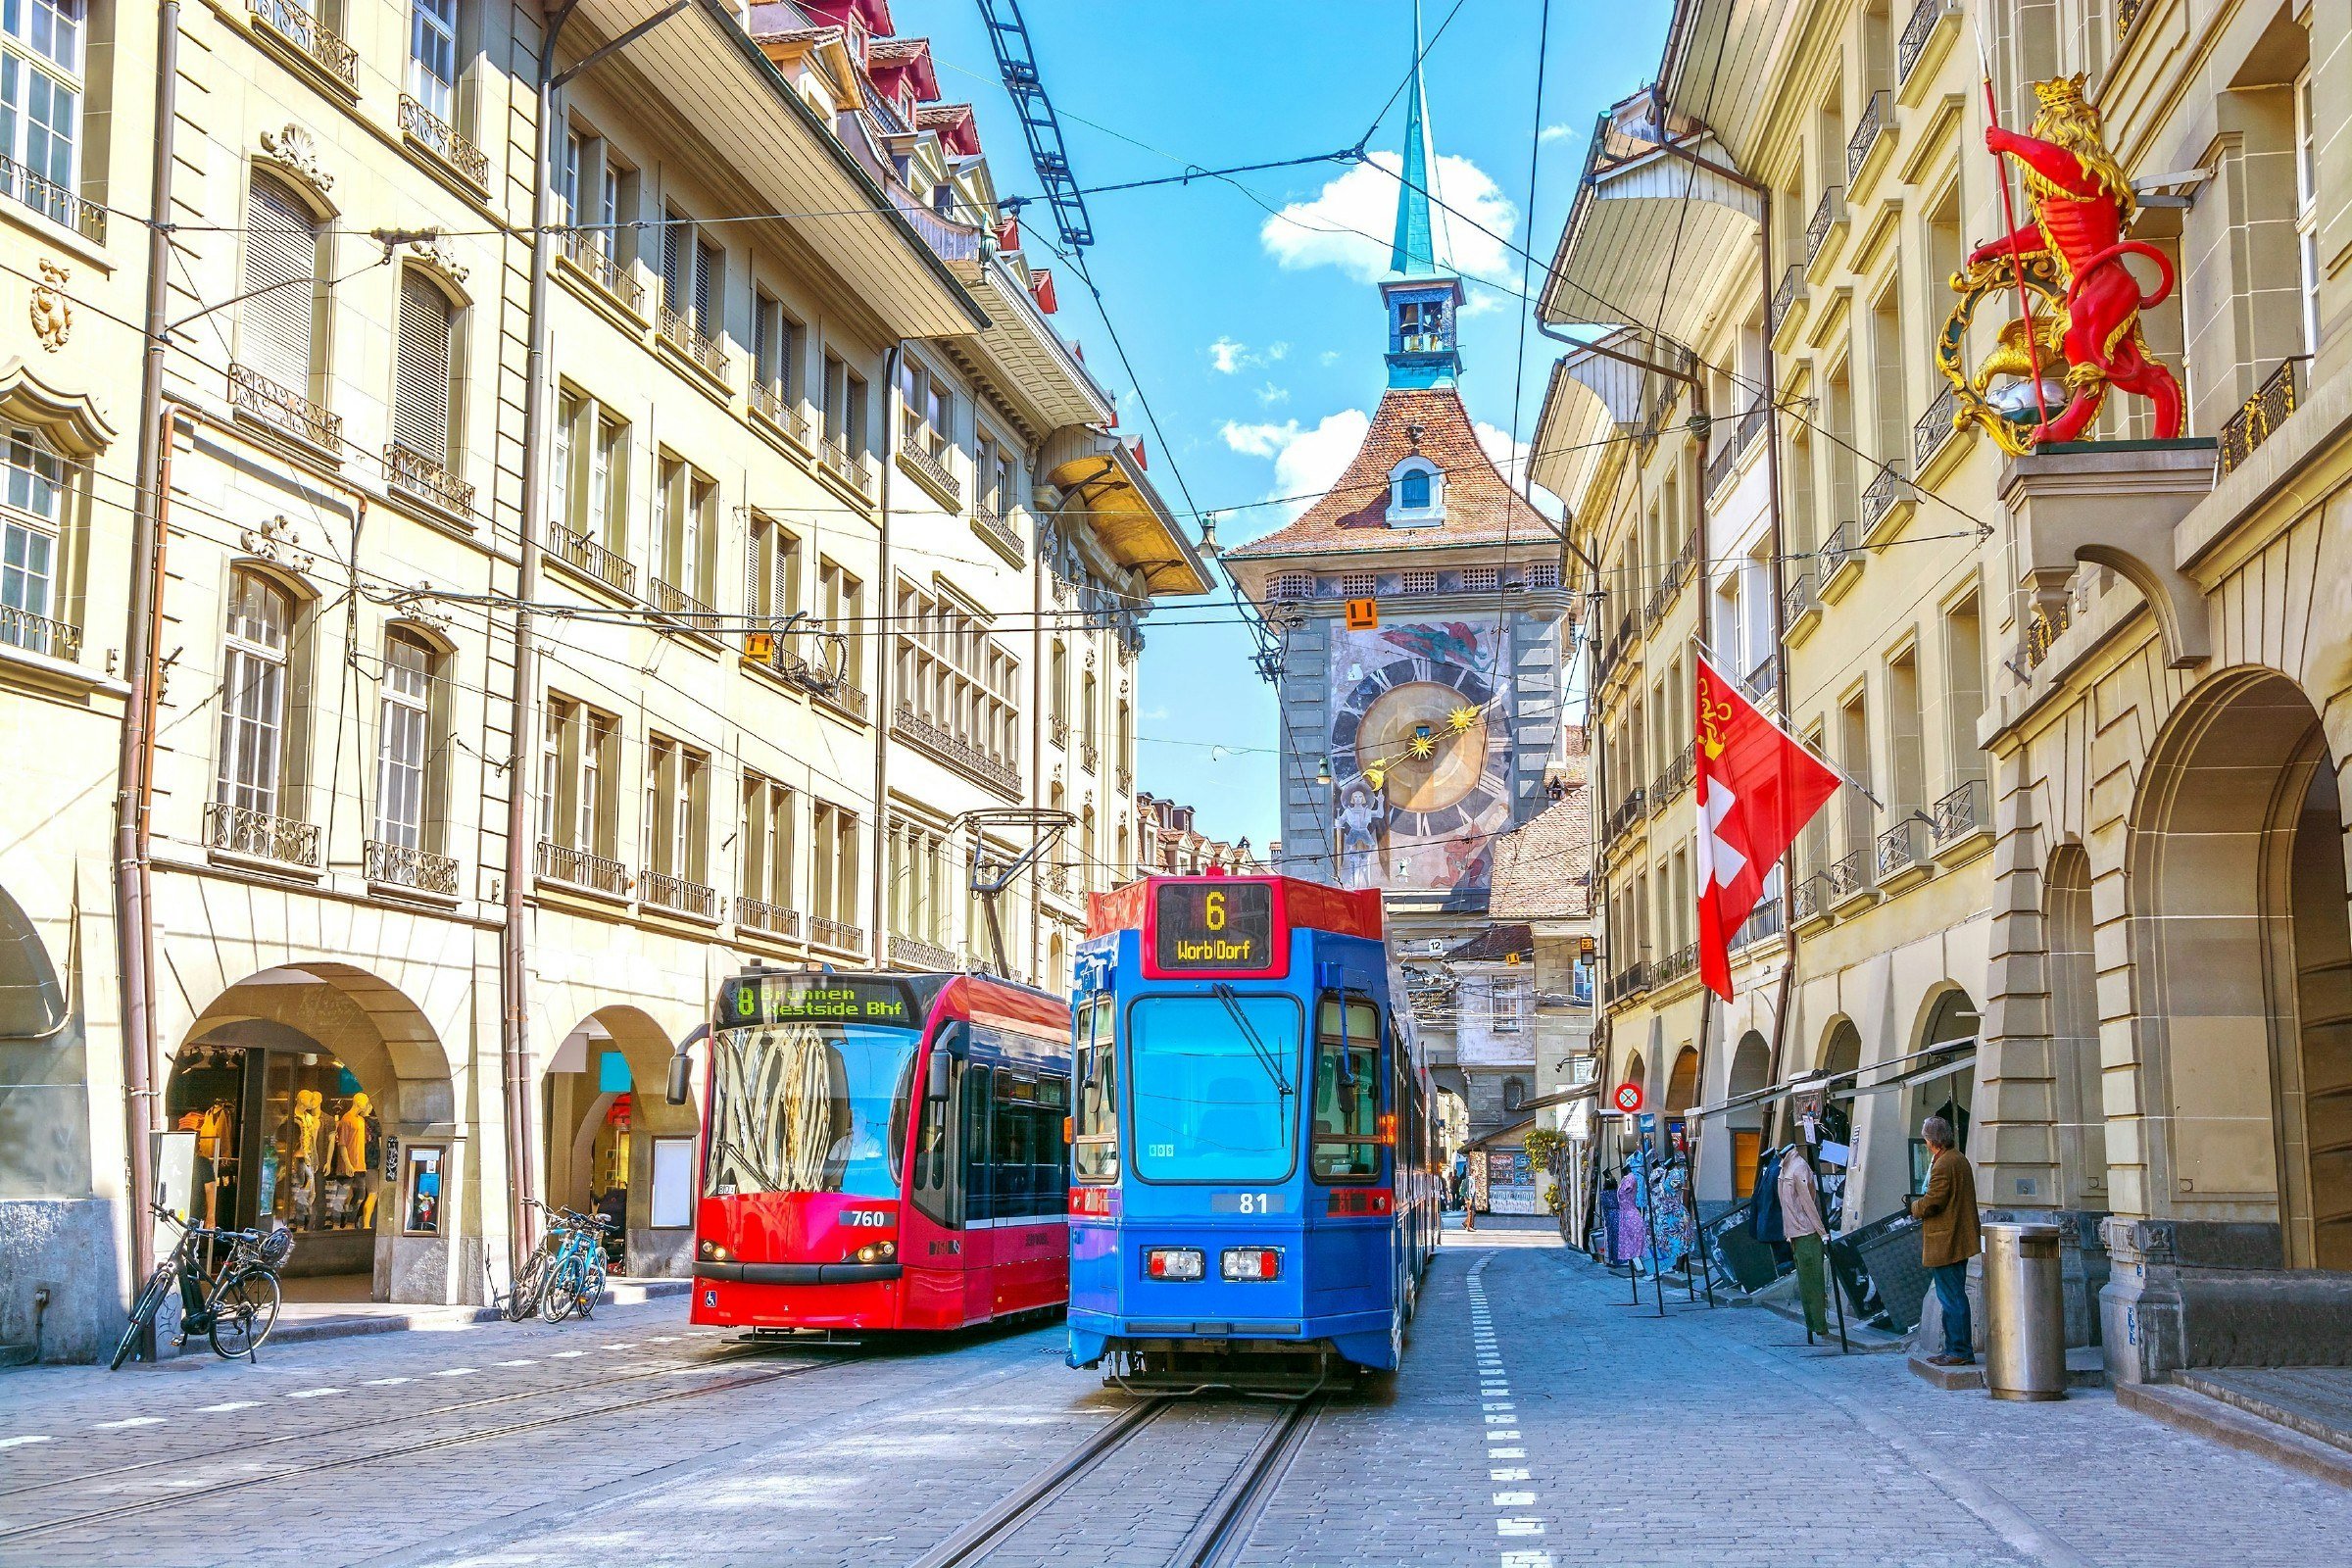 Trams outside the Zytglogge astronomical clock tower in the historic old medieval city center of Bern